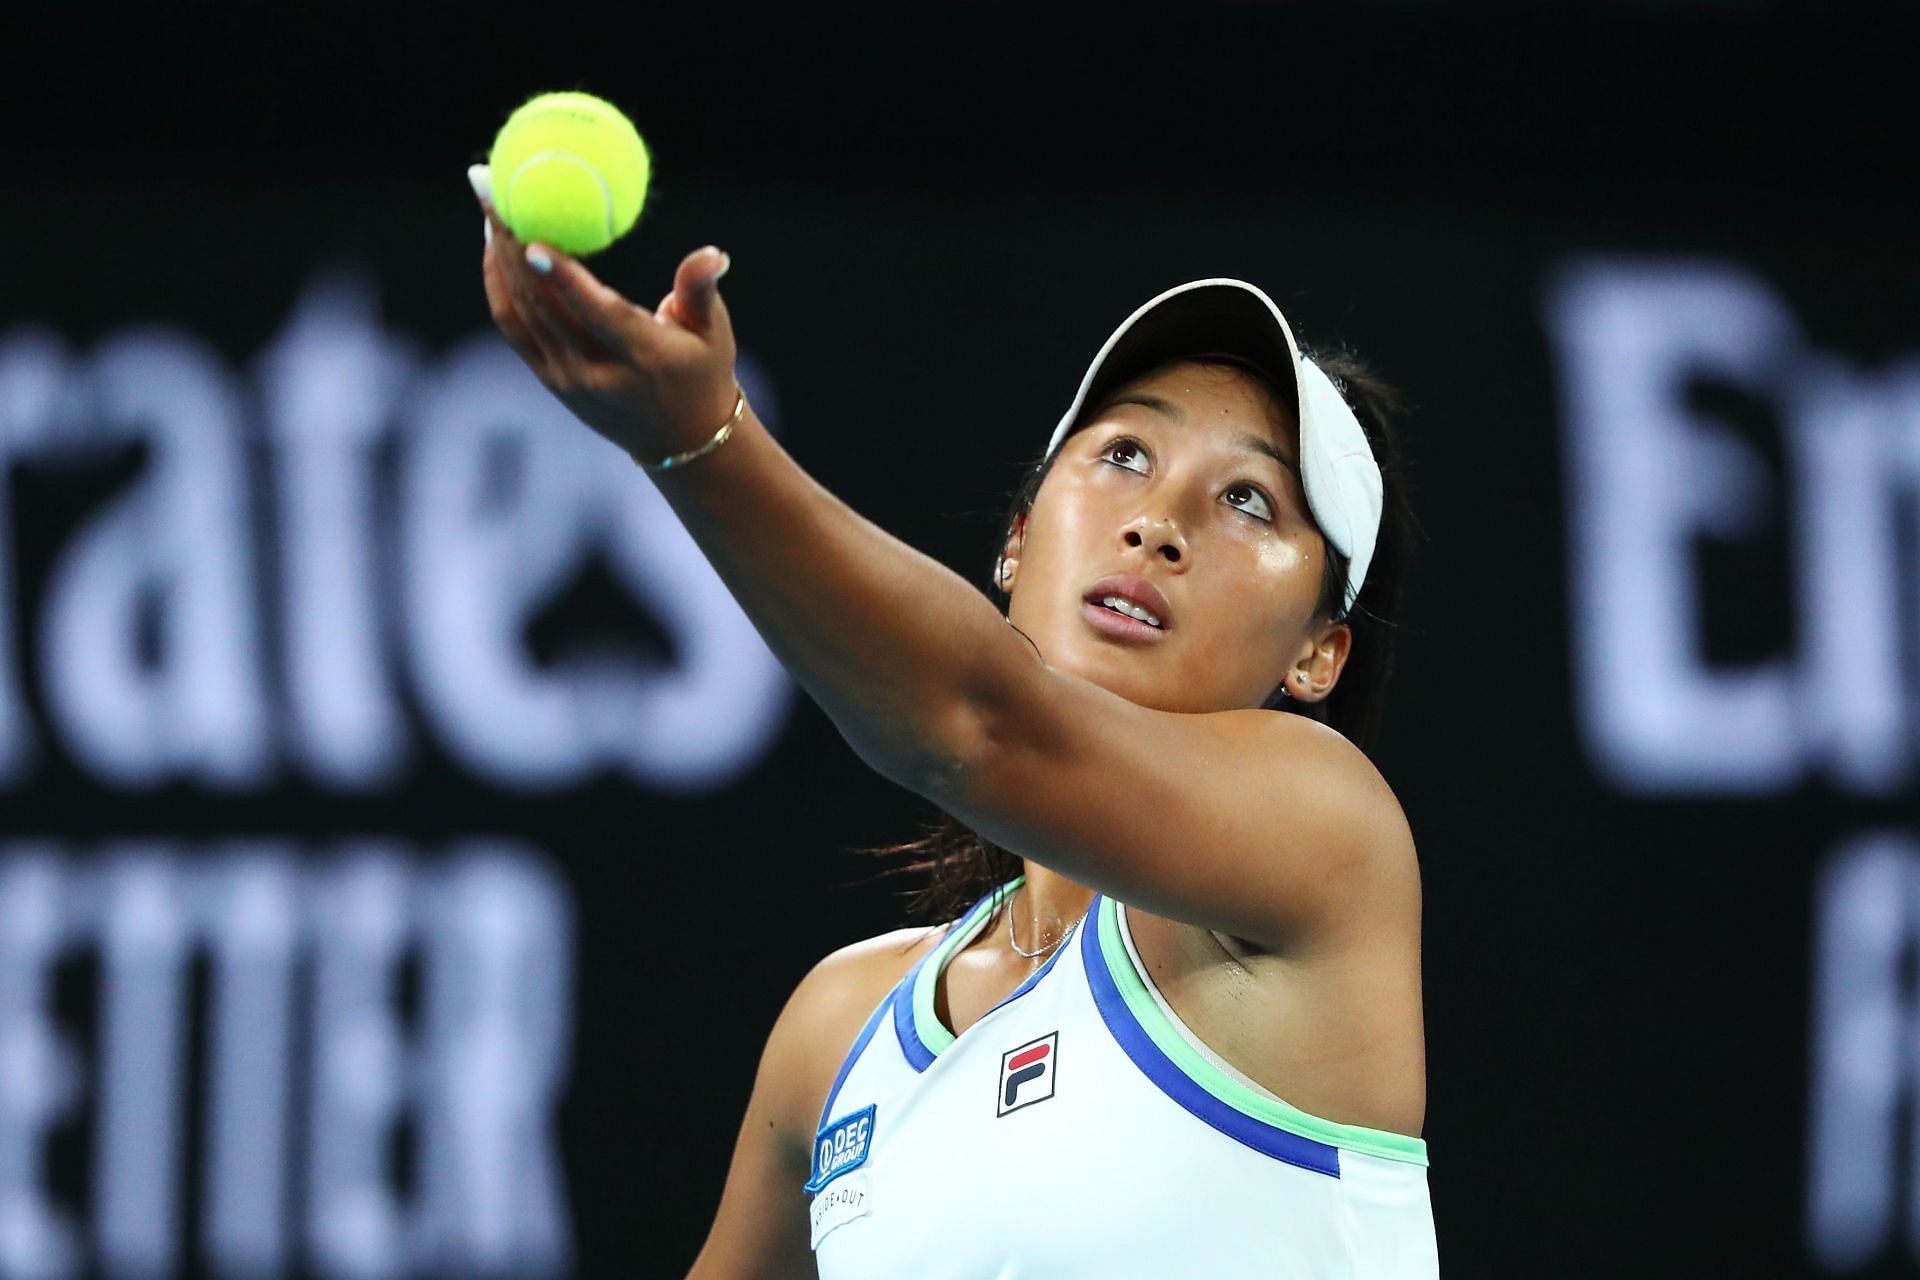 Priscilla Hon will be looking to back up her incredible first-round win over Kvitova.